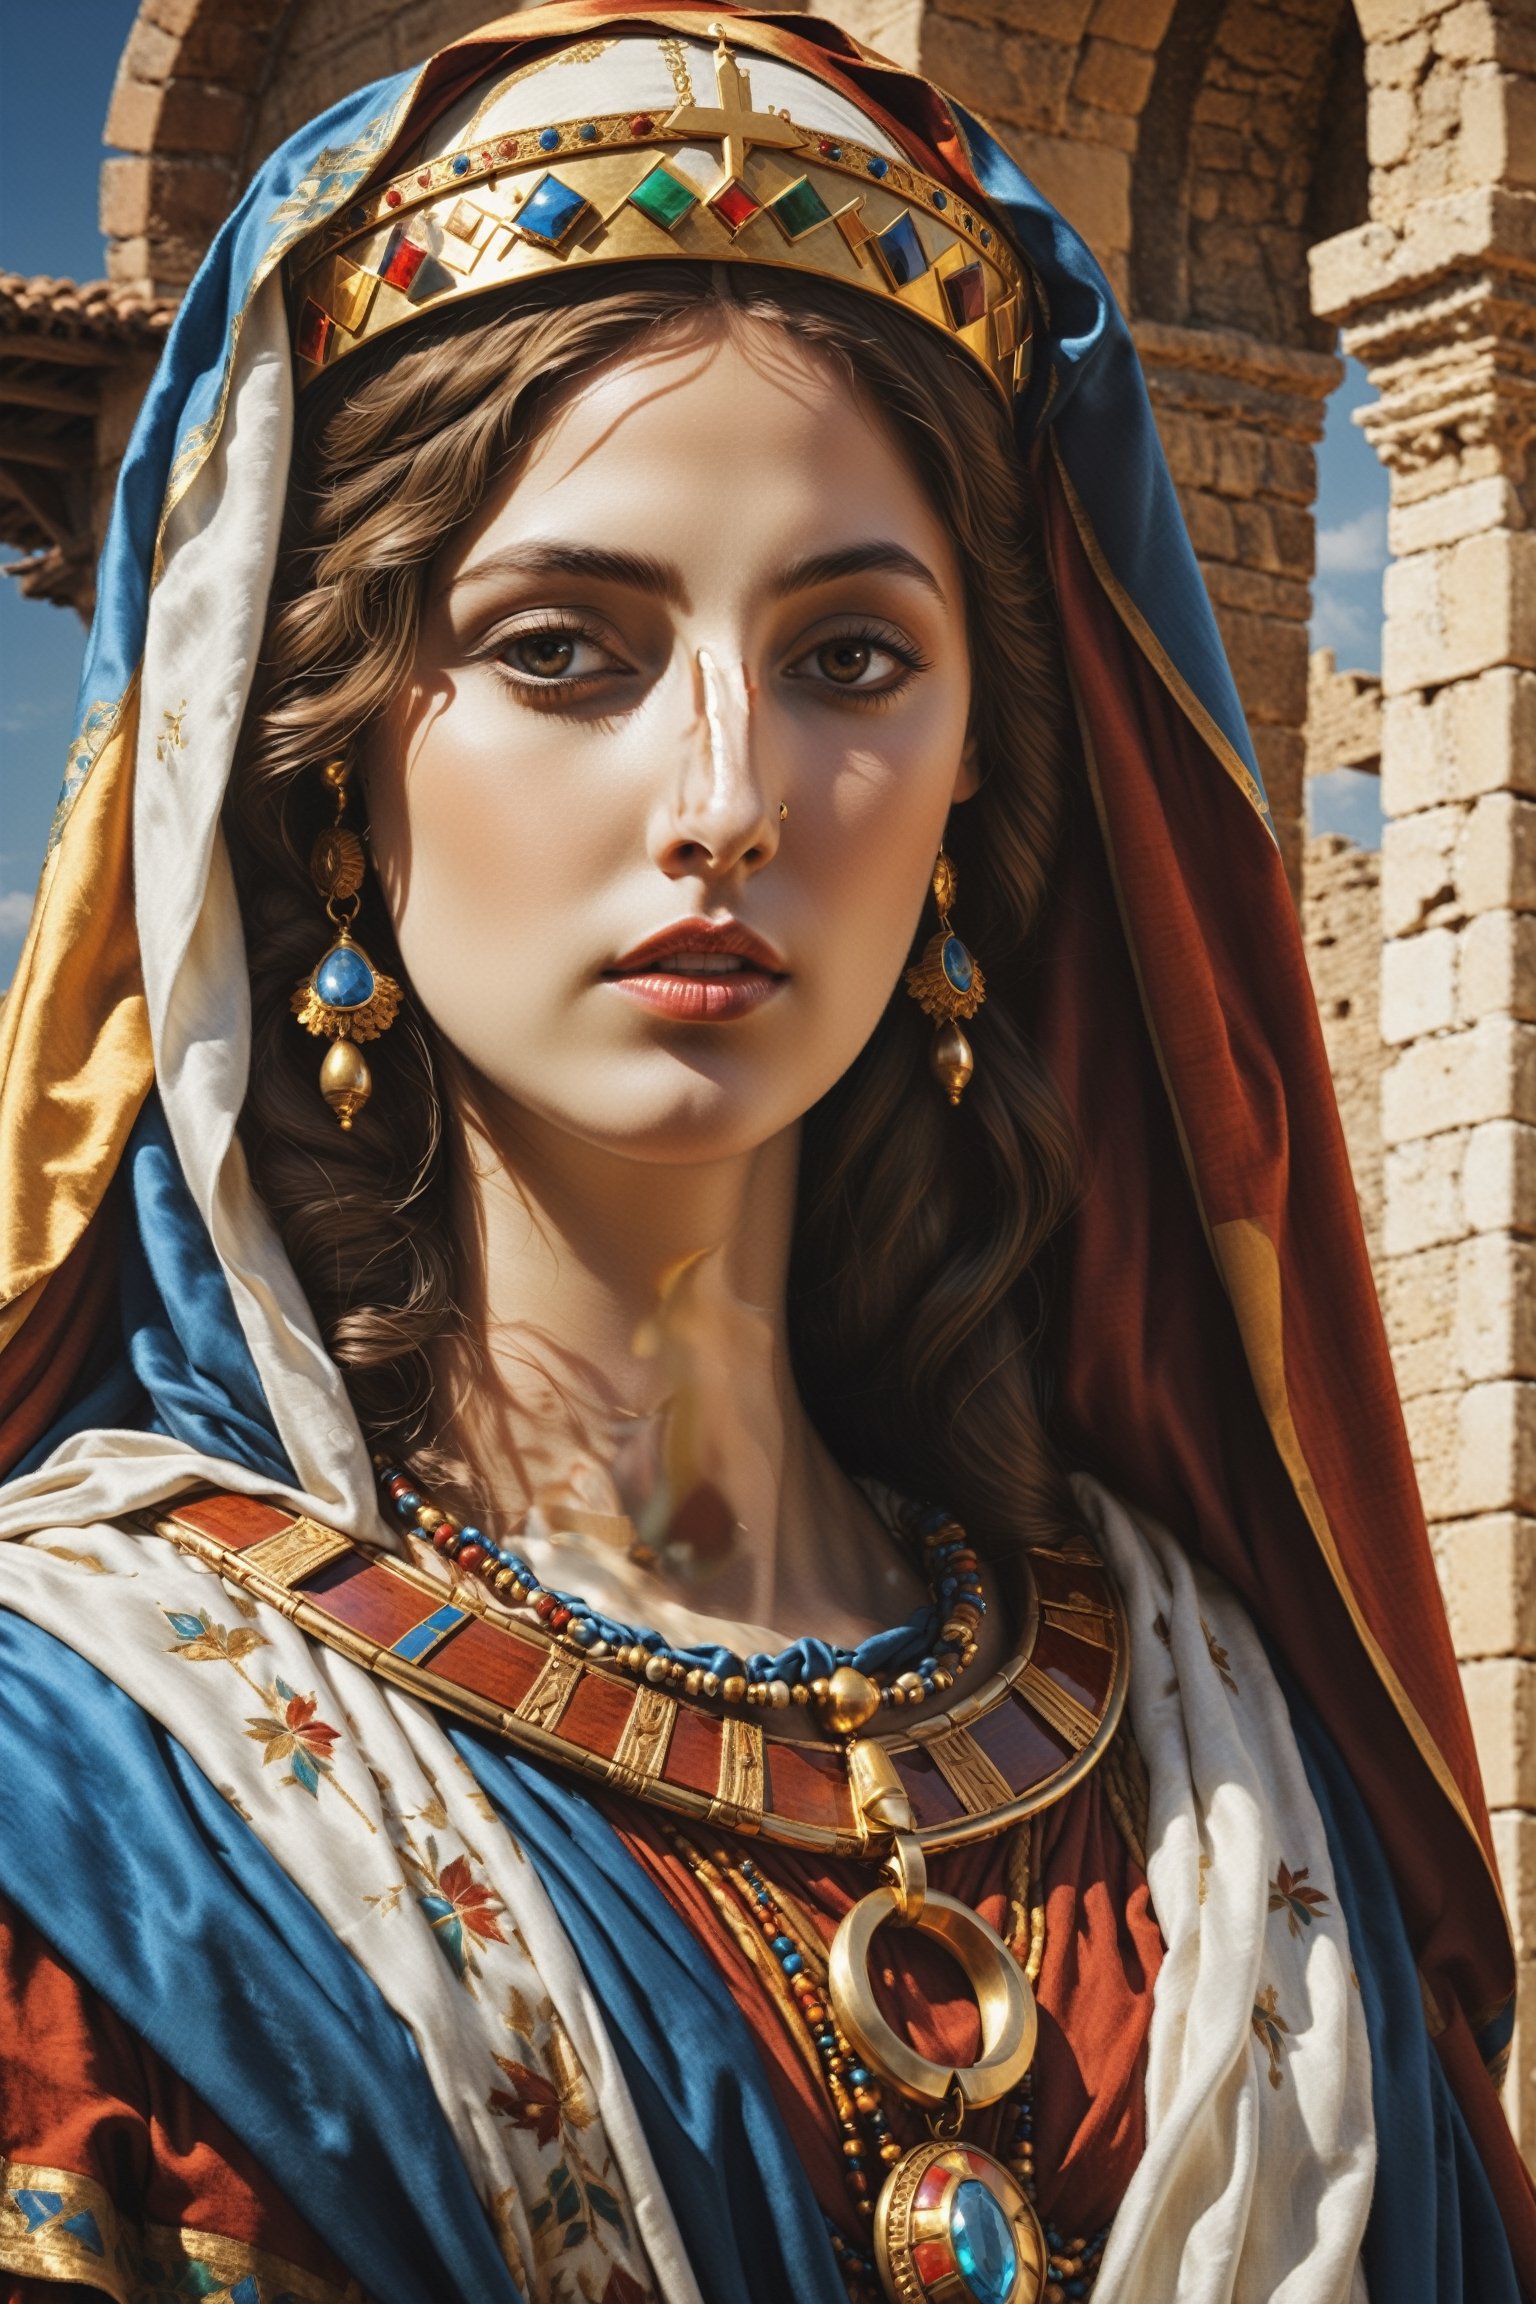 ((Mary)) mother of Jesus at first century, wearing ancient Israelite garment and accesories, (RAW photo, best quality), (realistic, photo-Realistic:1.3), best quality, masterpiece, beautiful and aesthetic, 16K, (HDR:1.4), high contrast, (vibrant color:1.4), (muted colors, dim colors, soothing tones:0), Exquisite details and textures, cinematic shot, (((wide shot))), ((establishing shot)), (full body), Warm tone, (Bright and intense:1.2), wide shot, ultra realistic illustration, siena natural ratio,
Art by greg rutkowski and raphael lacoste,
Perfect anatomy, centered, approaching perfection, stunning, something that even doesn't exist, mythical being, energy, molecular, textures, pure perfection, divine presence, unforgettable, impressive, auras, fullbody:1.1, fullbody shot,photo r3al